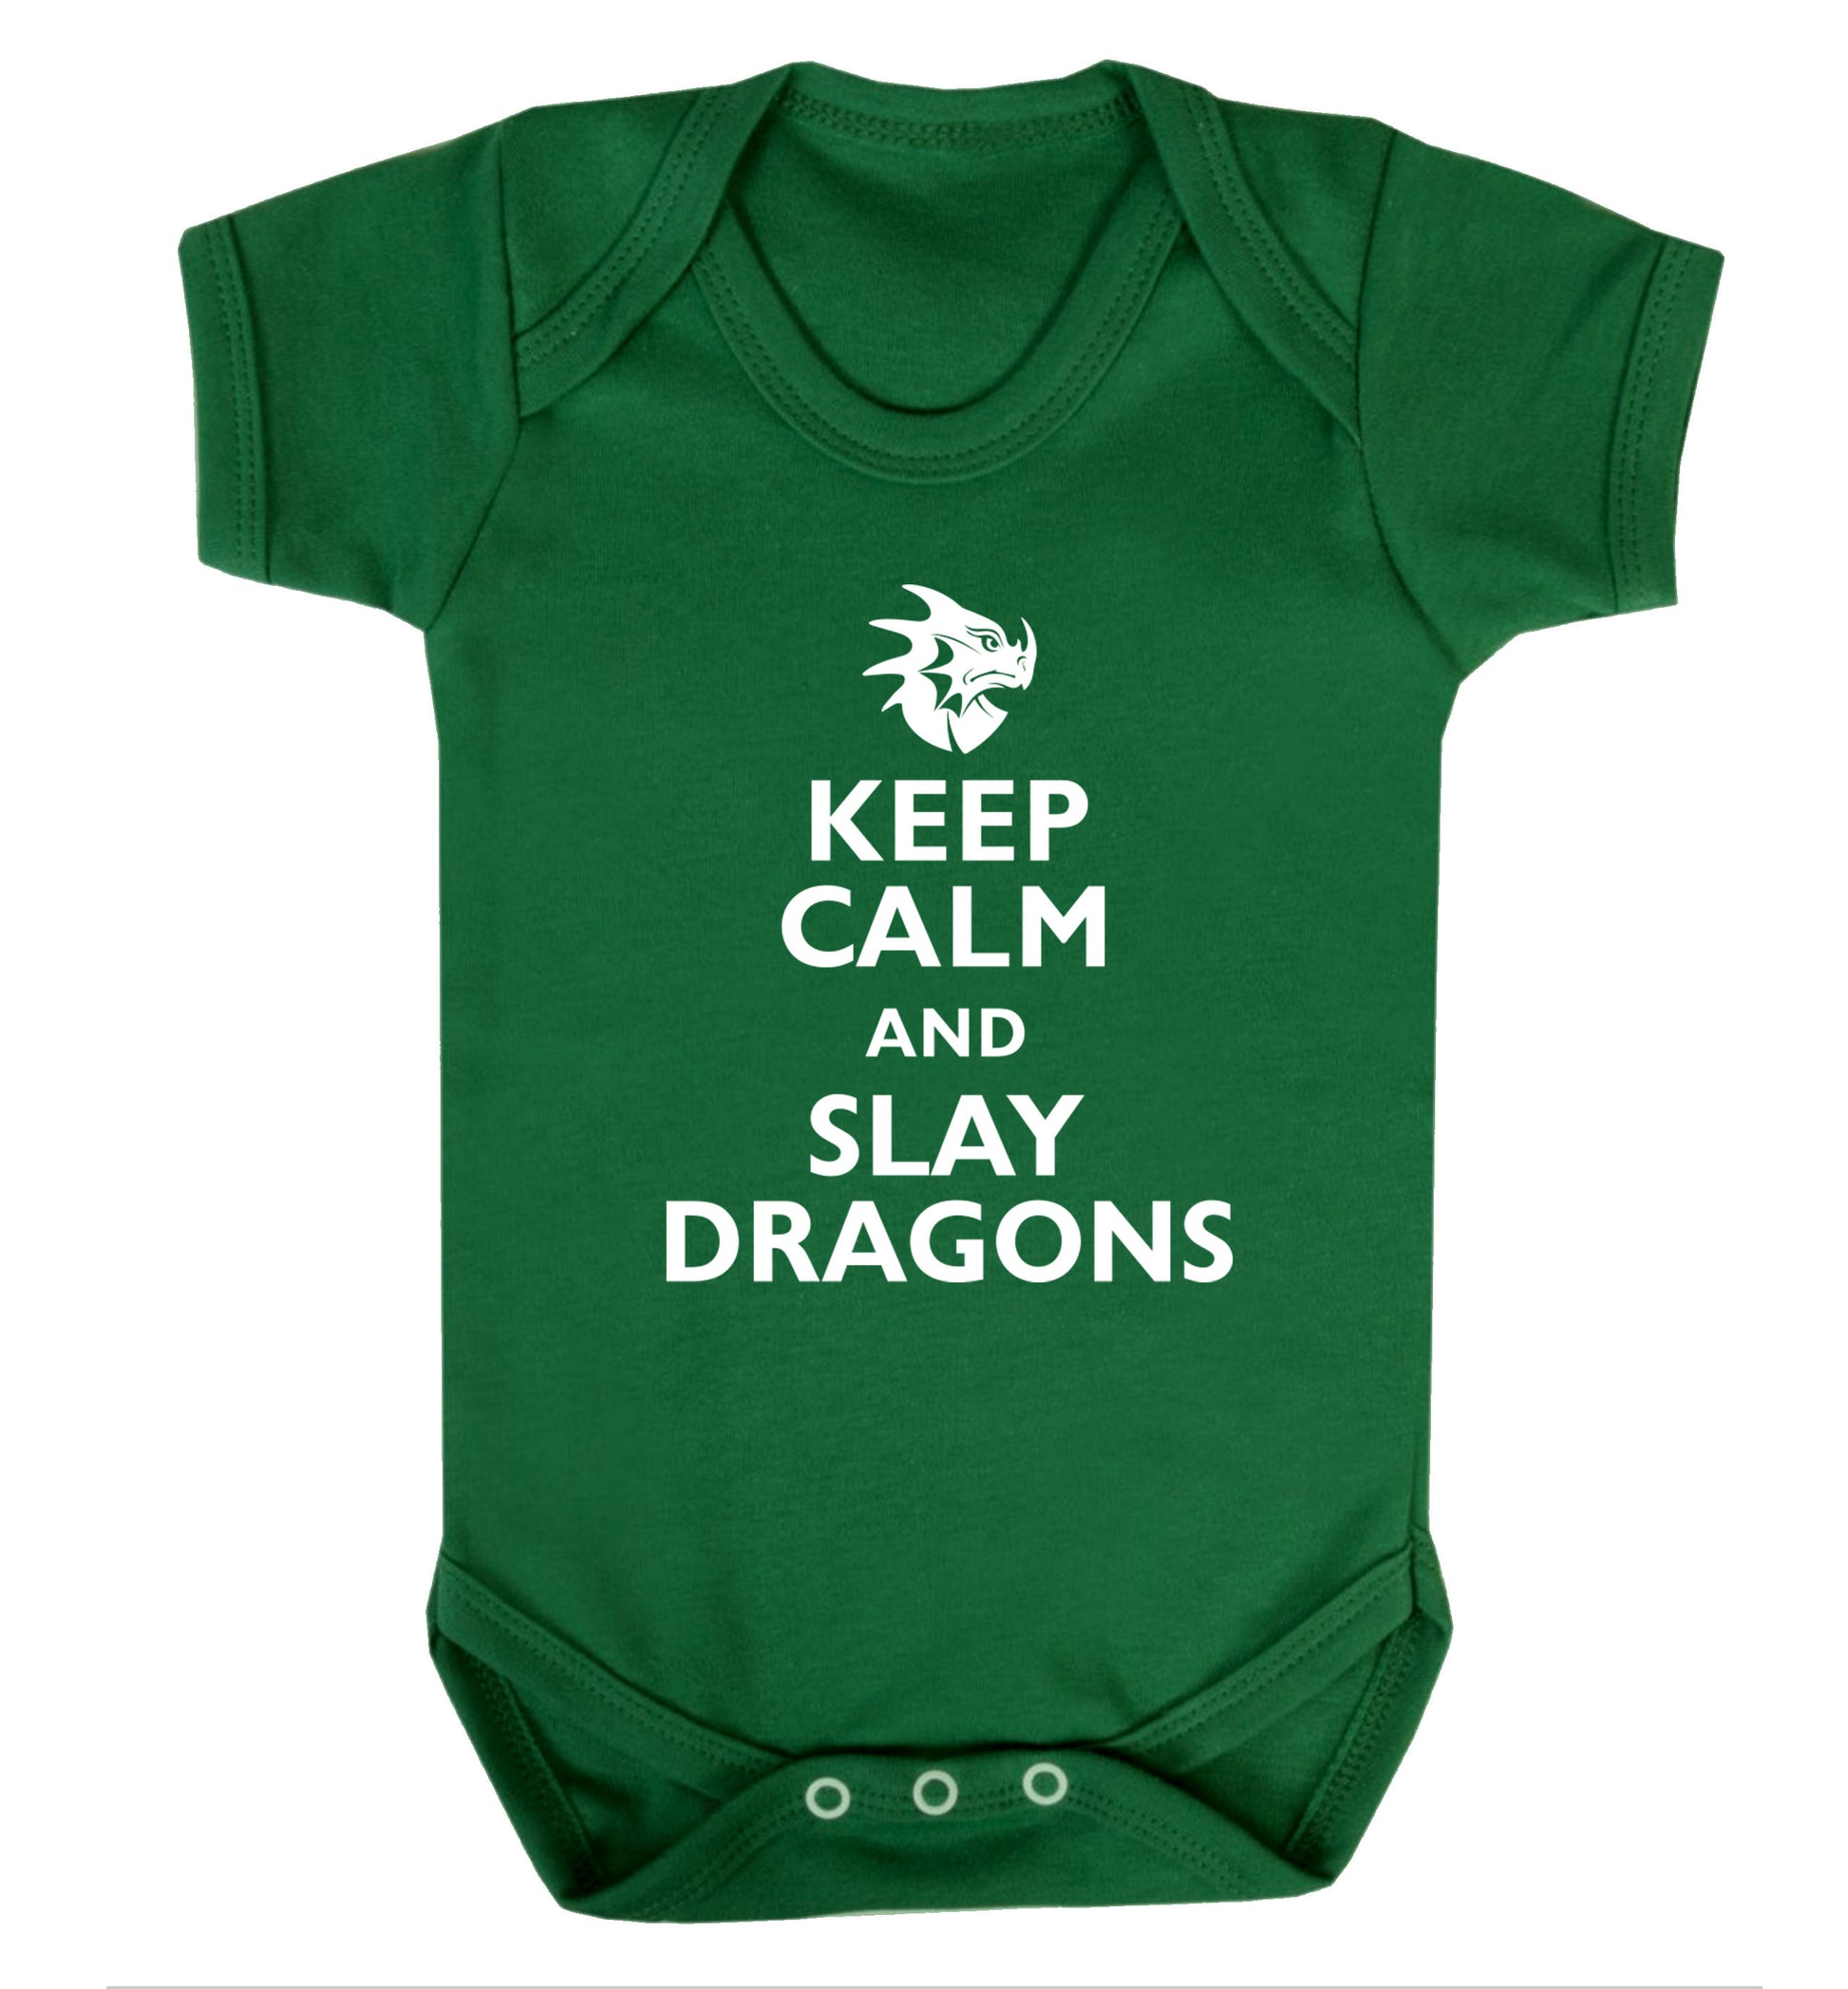 Keep calm and slay dragons Baby Vest green 18-24 months